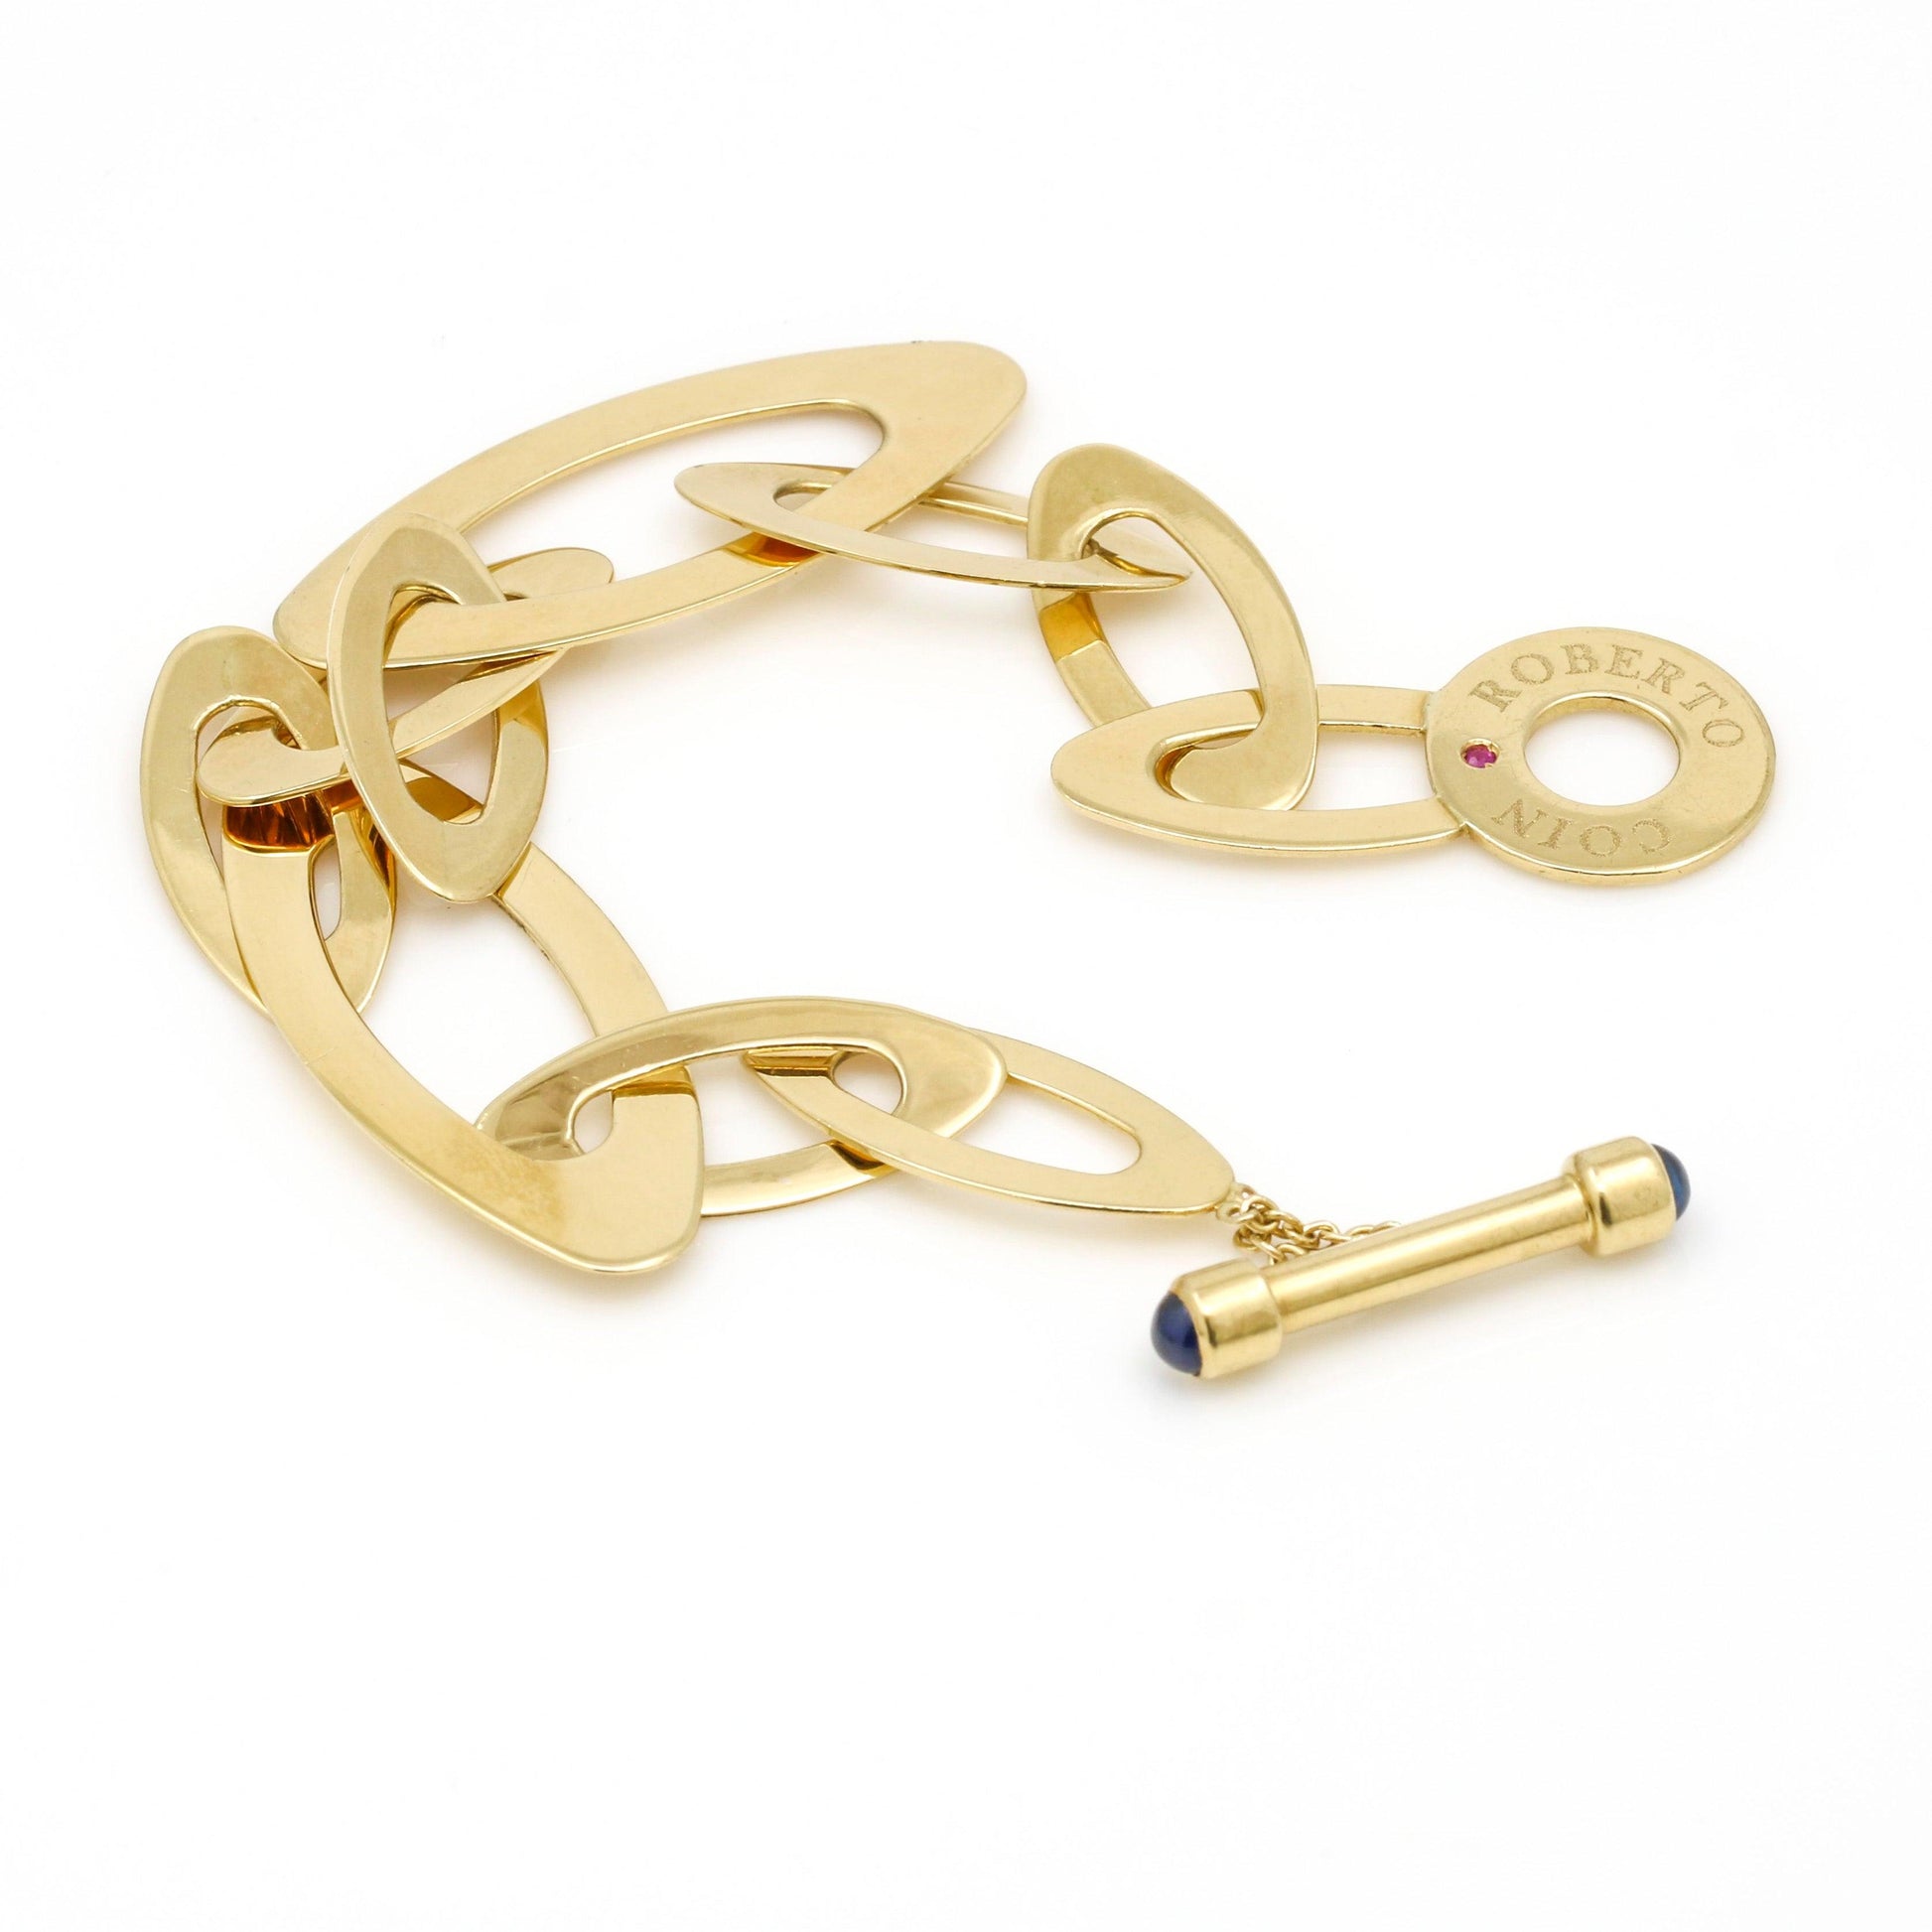 Roberto Coin Chic and Shine X-Large Oval Link Toggle Bracelet in 18k Yellow Gold - 31 Jewels Inc.